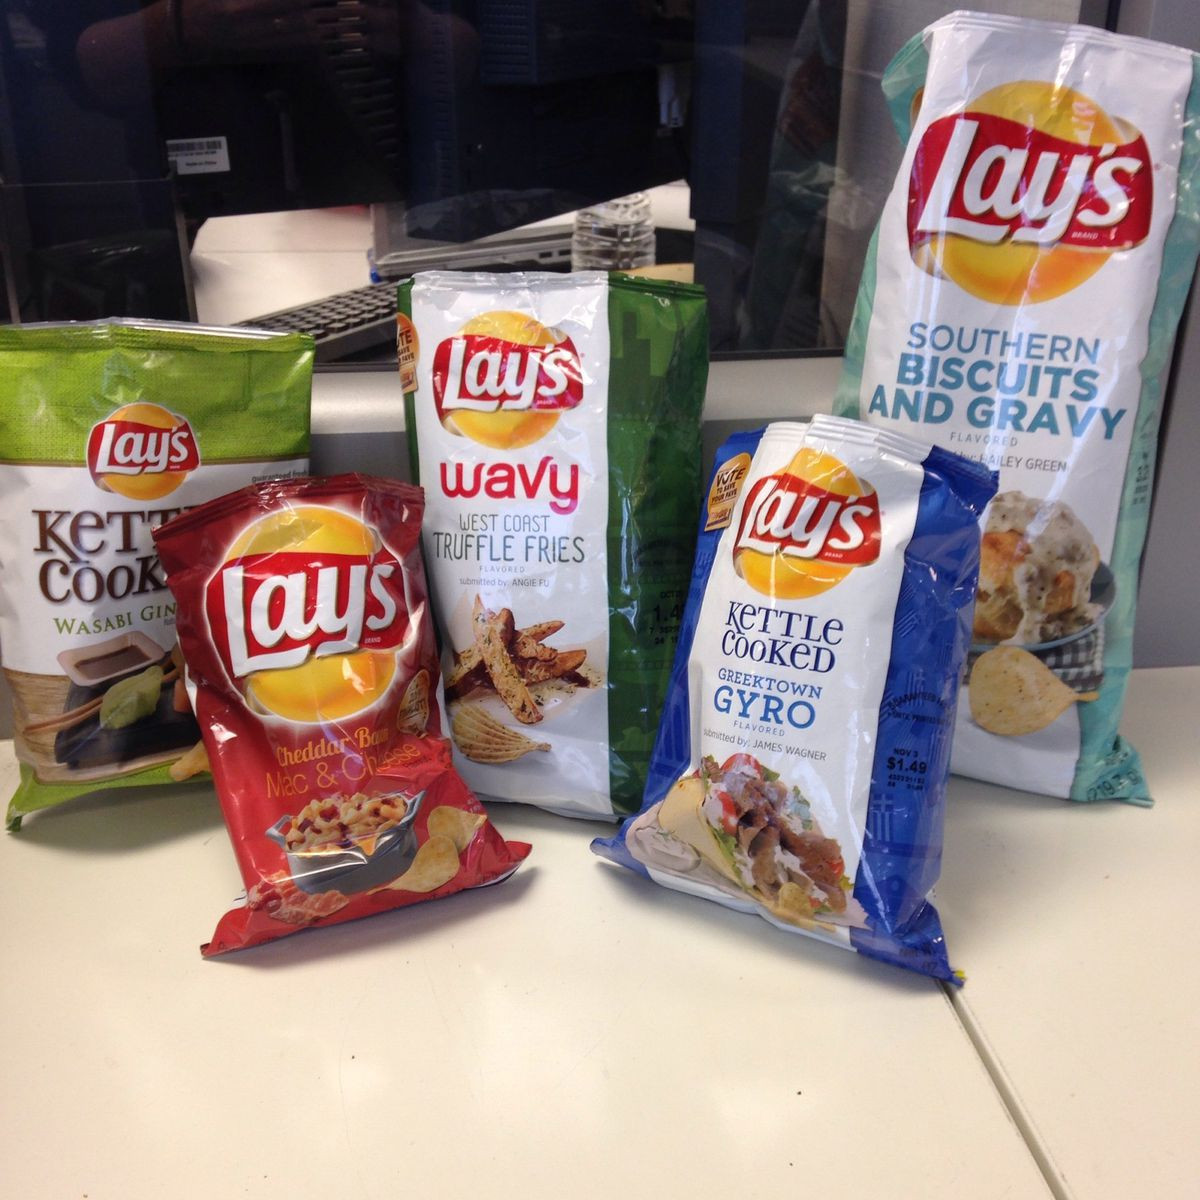 Lays Southern Biscuit And Gravy
 Southern Biscuits and Gravy is new Lay s potato chip